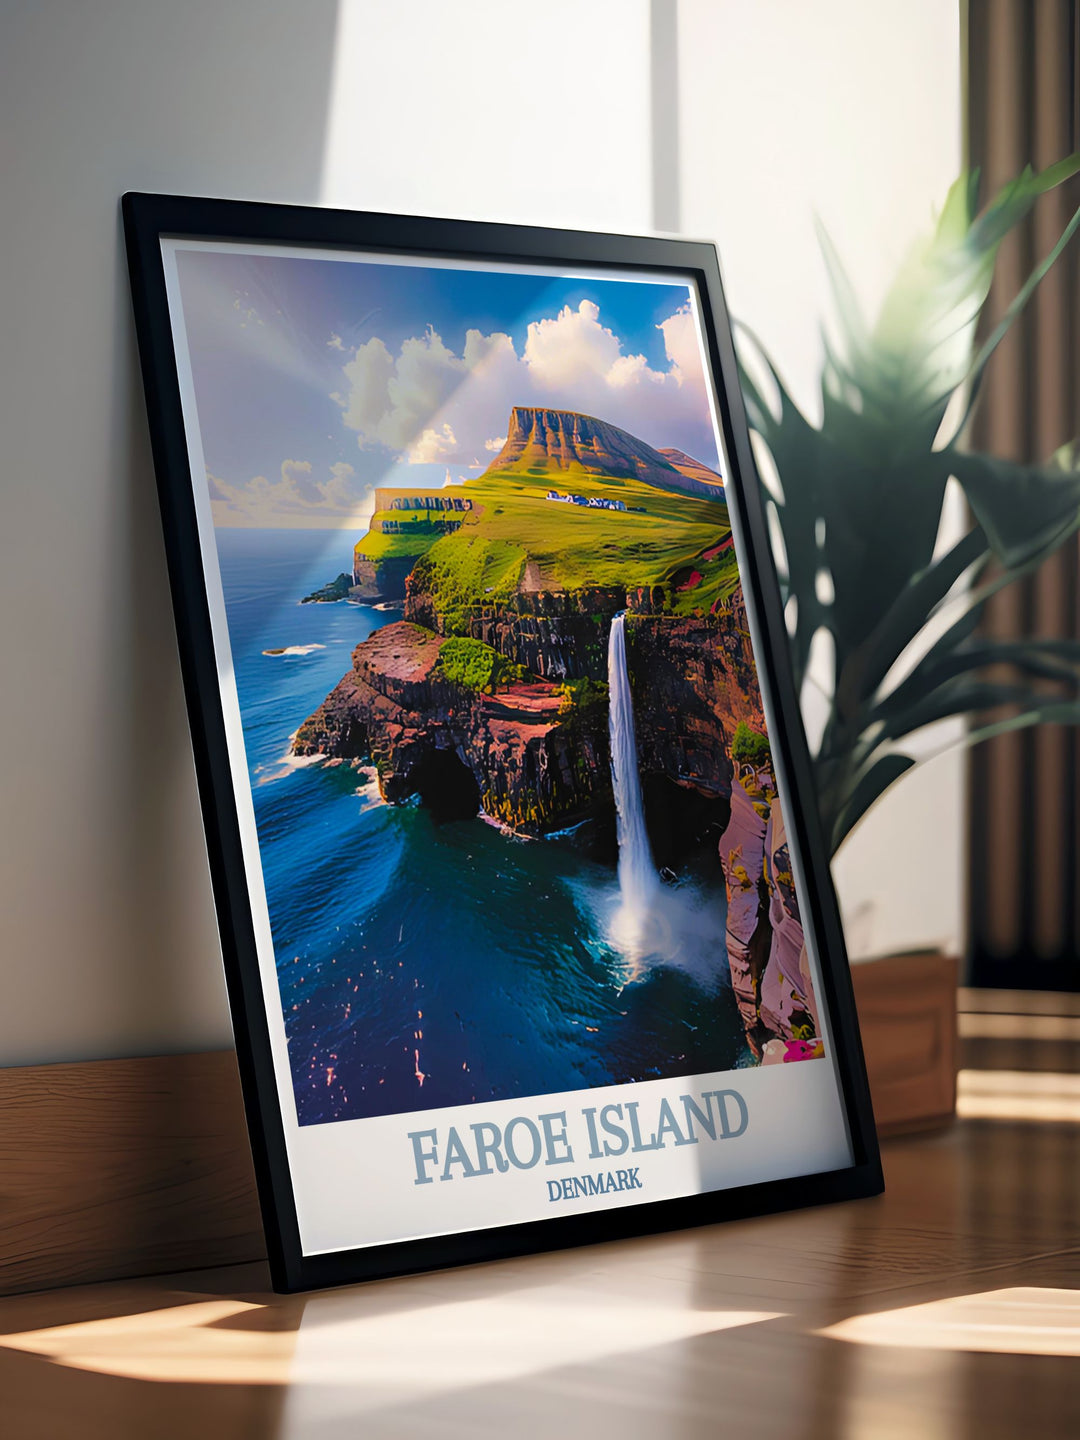 The natural beauty and dramatic landscapes of the Faroe Islands are celebrated in this poster, featuring the iconic Múlafossur Waterfall and inviting you to explore its breathtaking views.